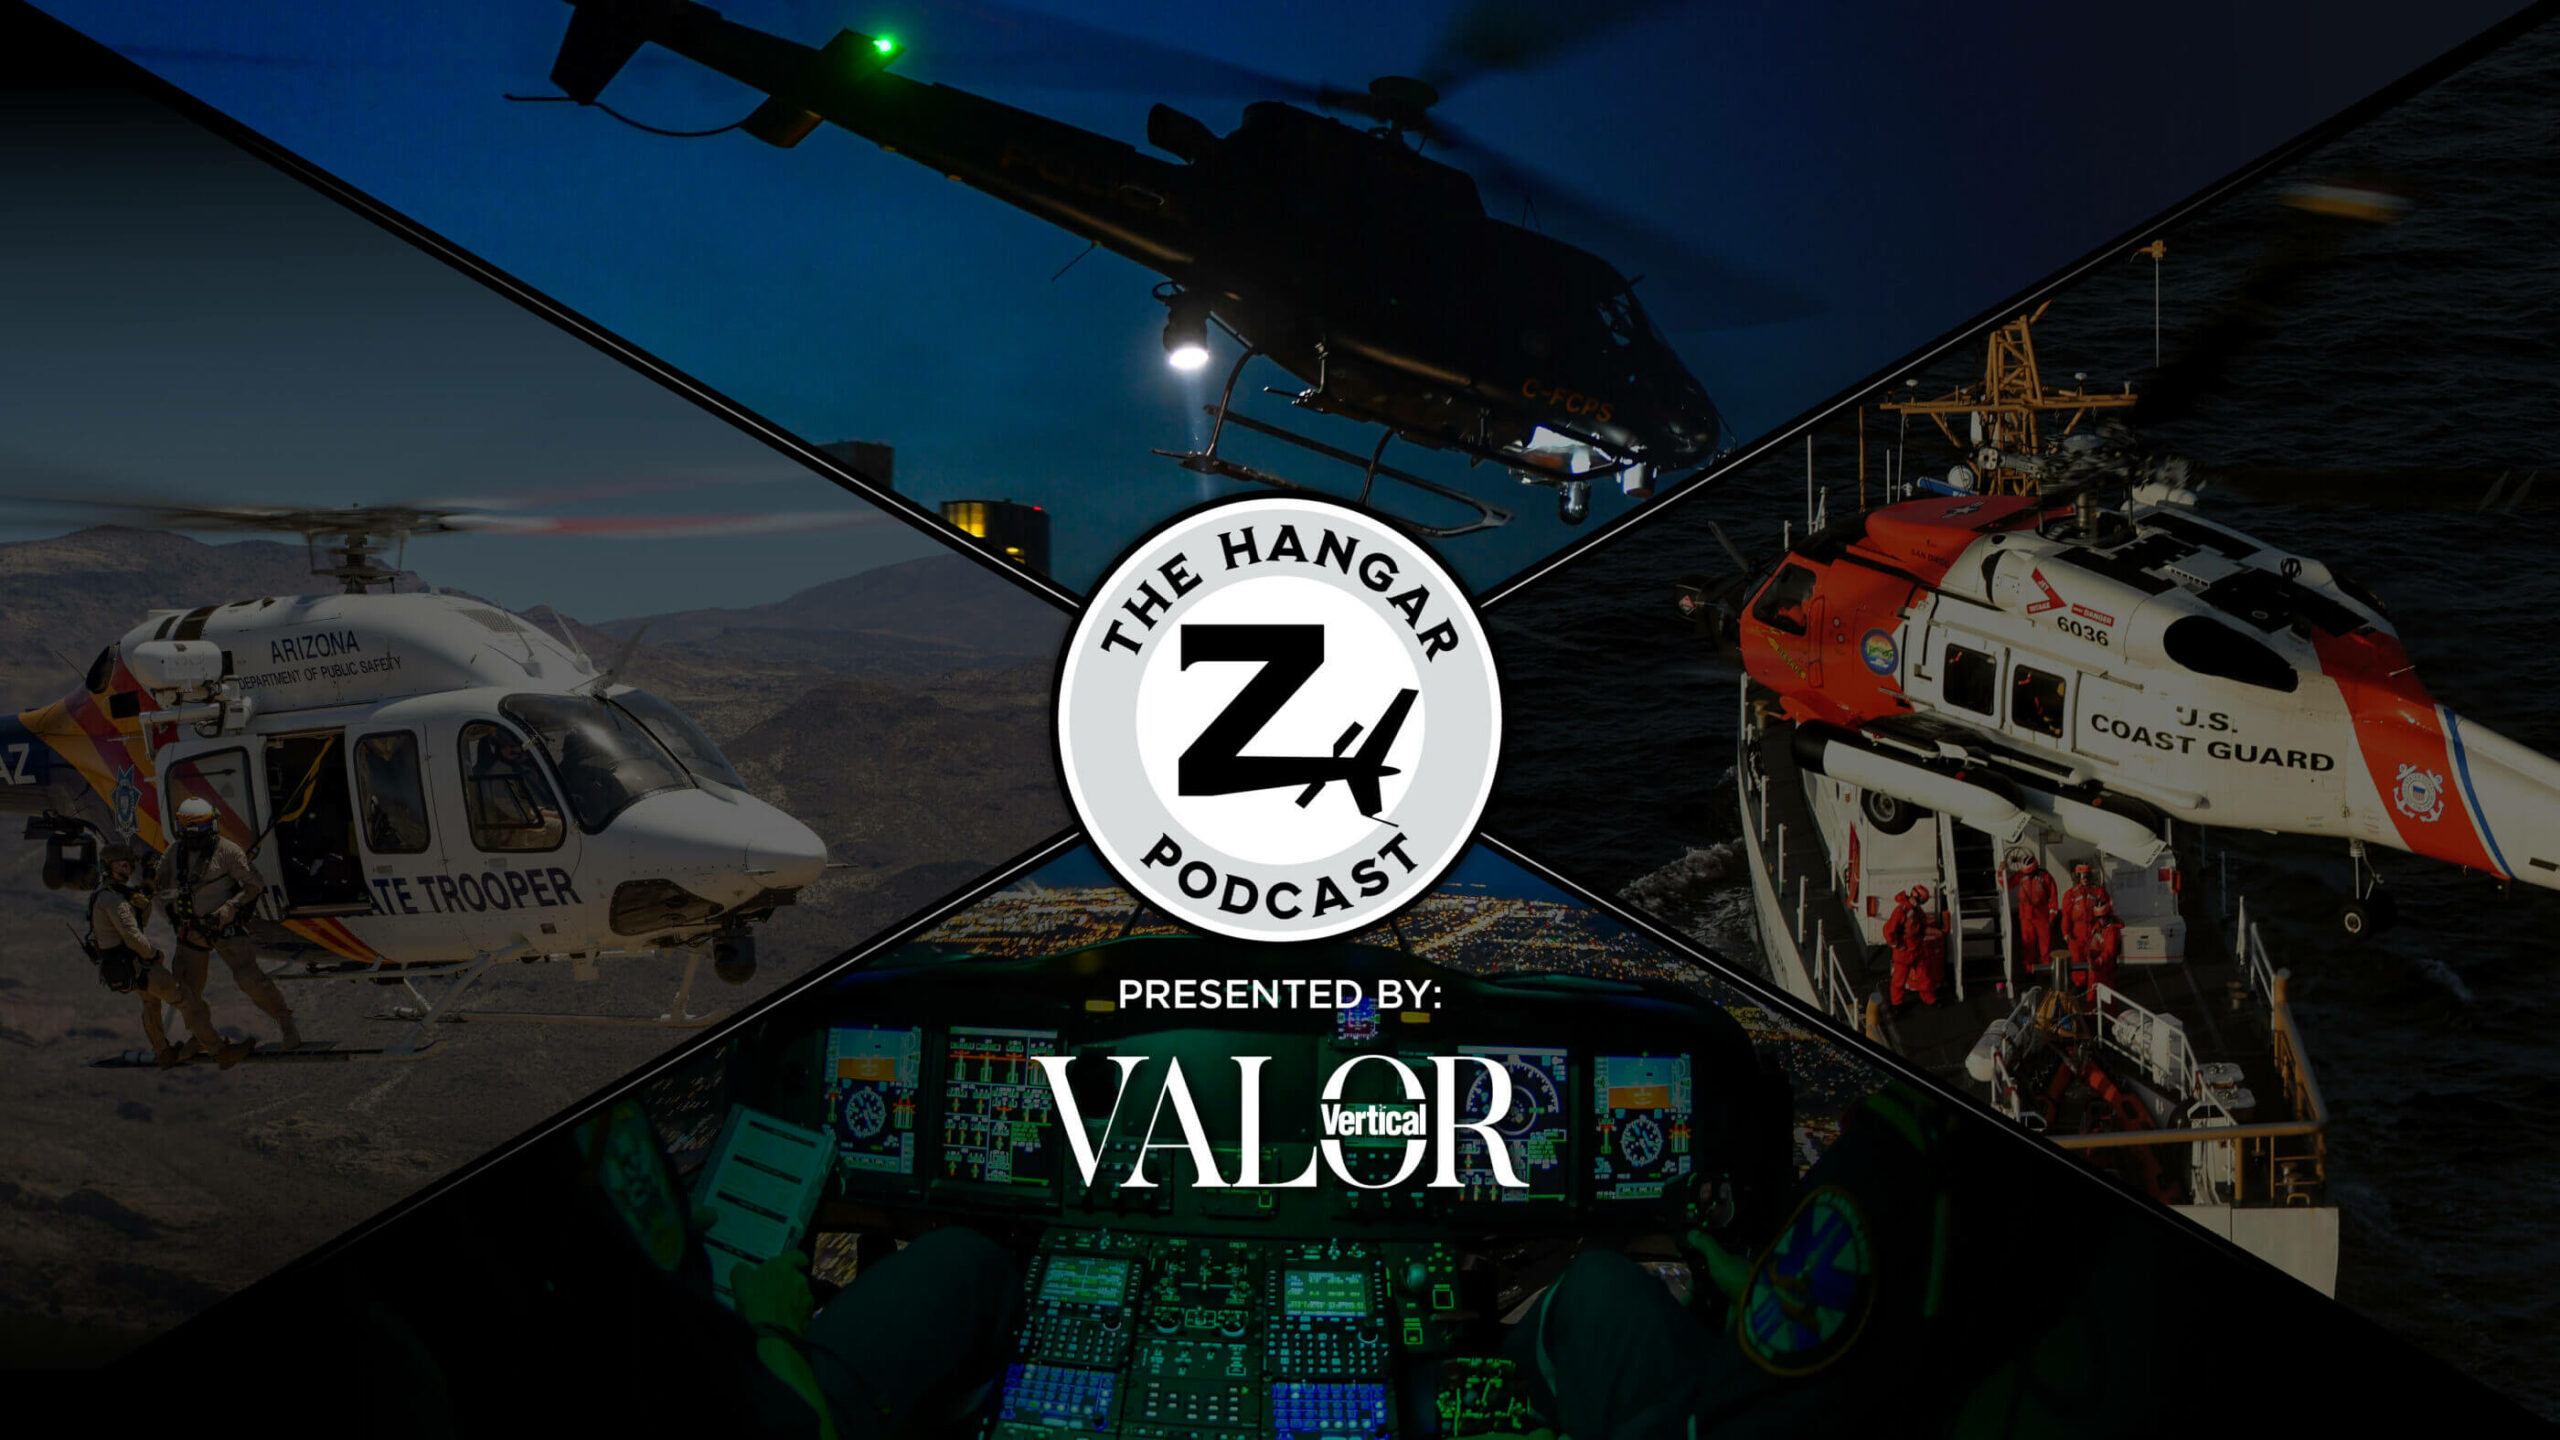 The Hangar Z Podcast: A preview of APSCON 2023 with APSA’s Dan Schwarzbach and Richard Bray